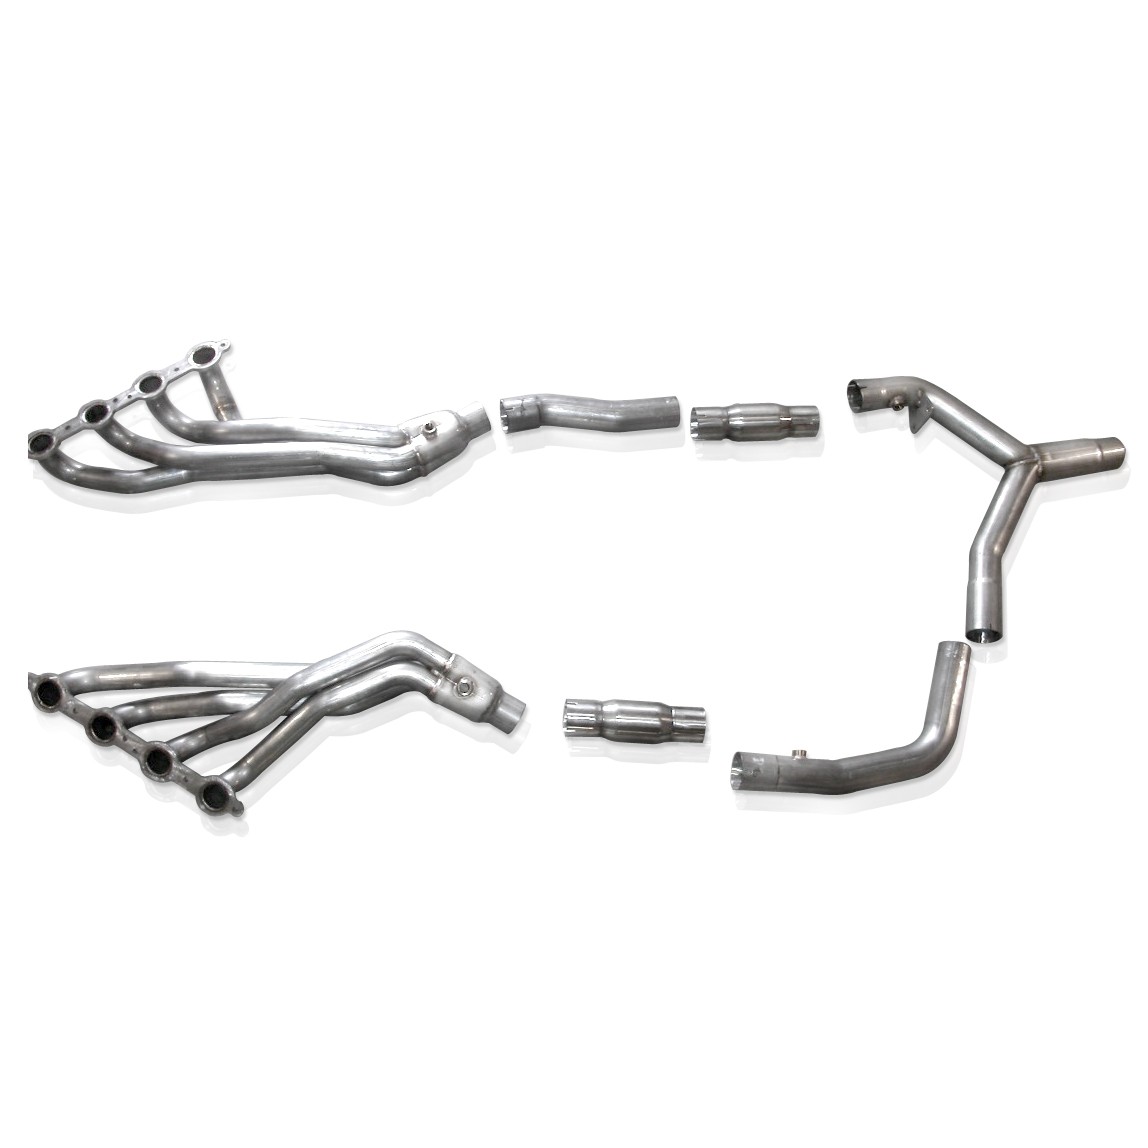 2000 Camaro LS1, 2000 Firebird LS1 SW Headers 1-3/4" With Catted Leads Factory Connect